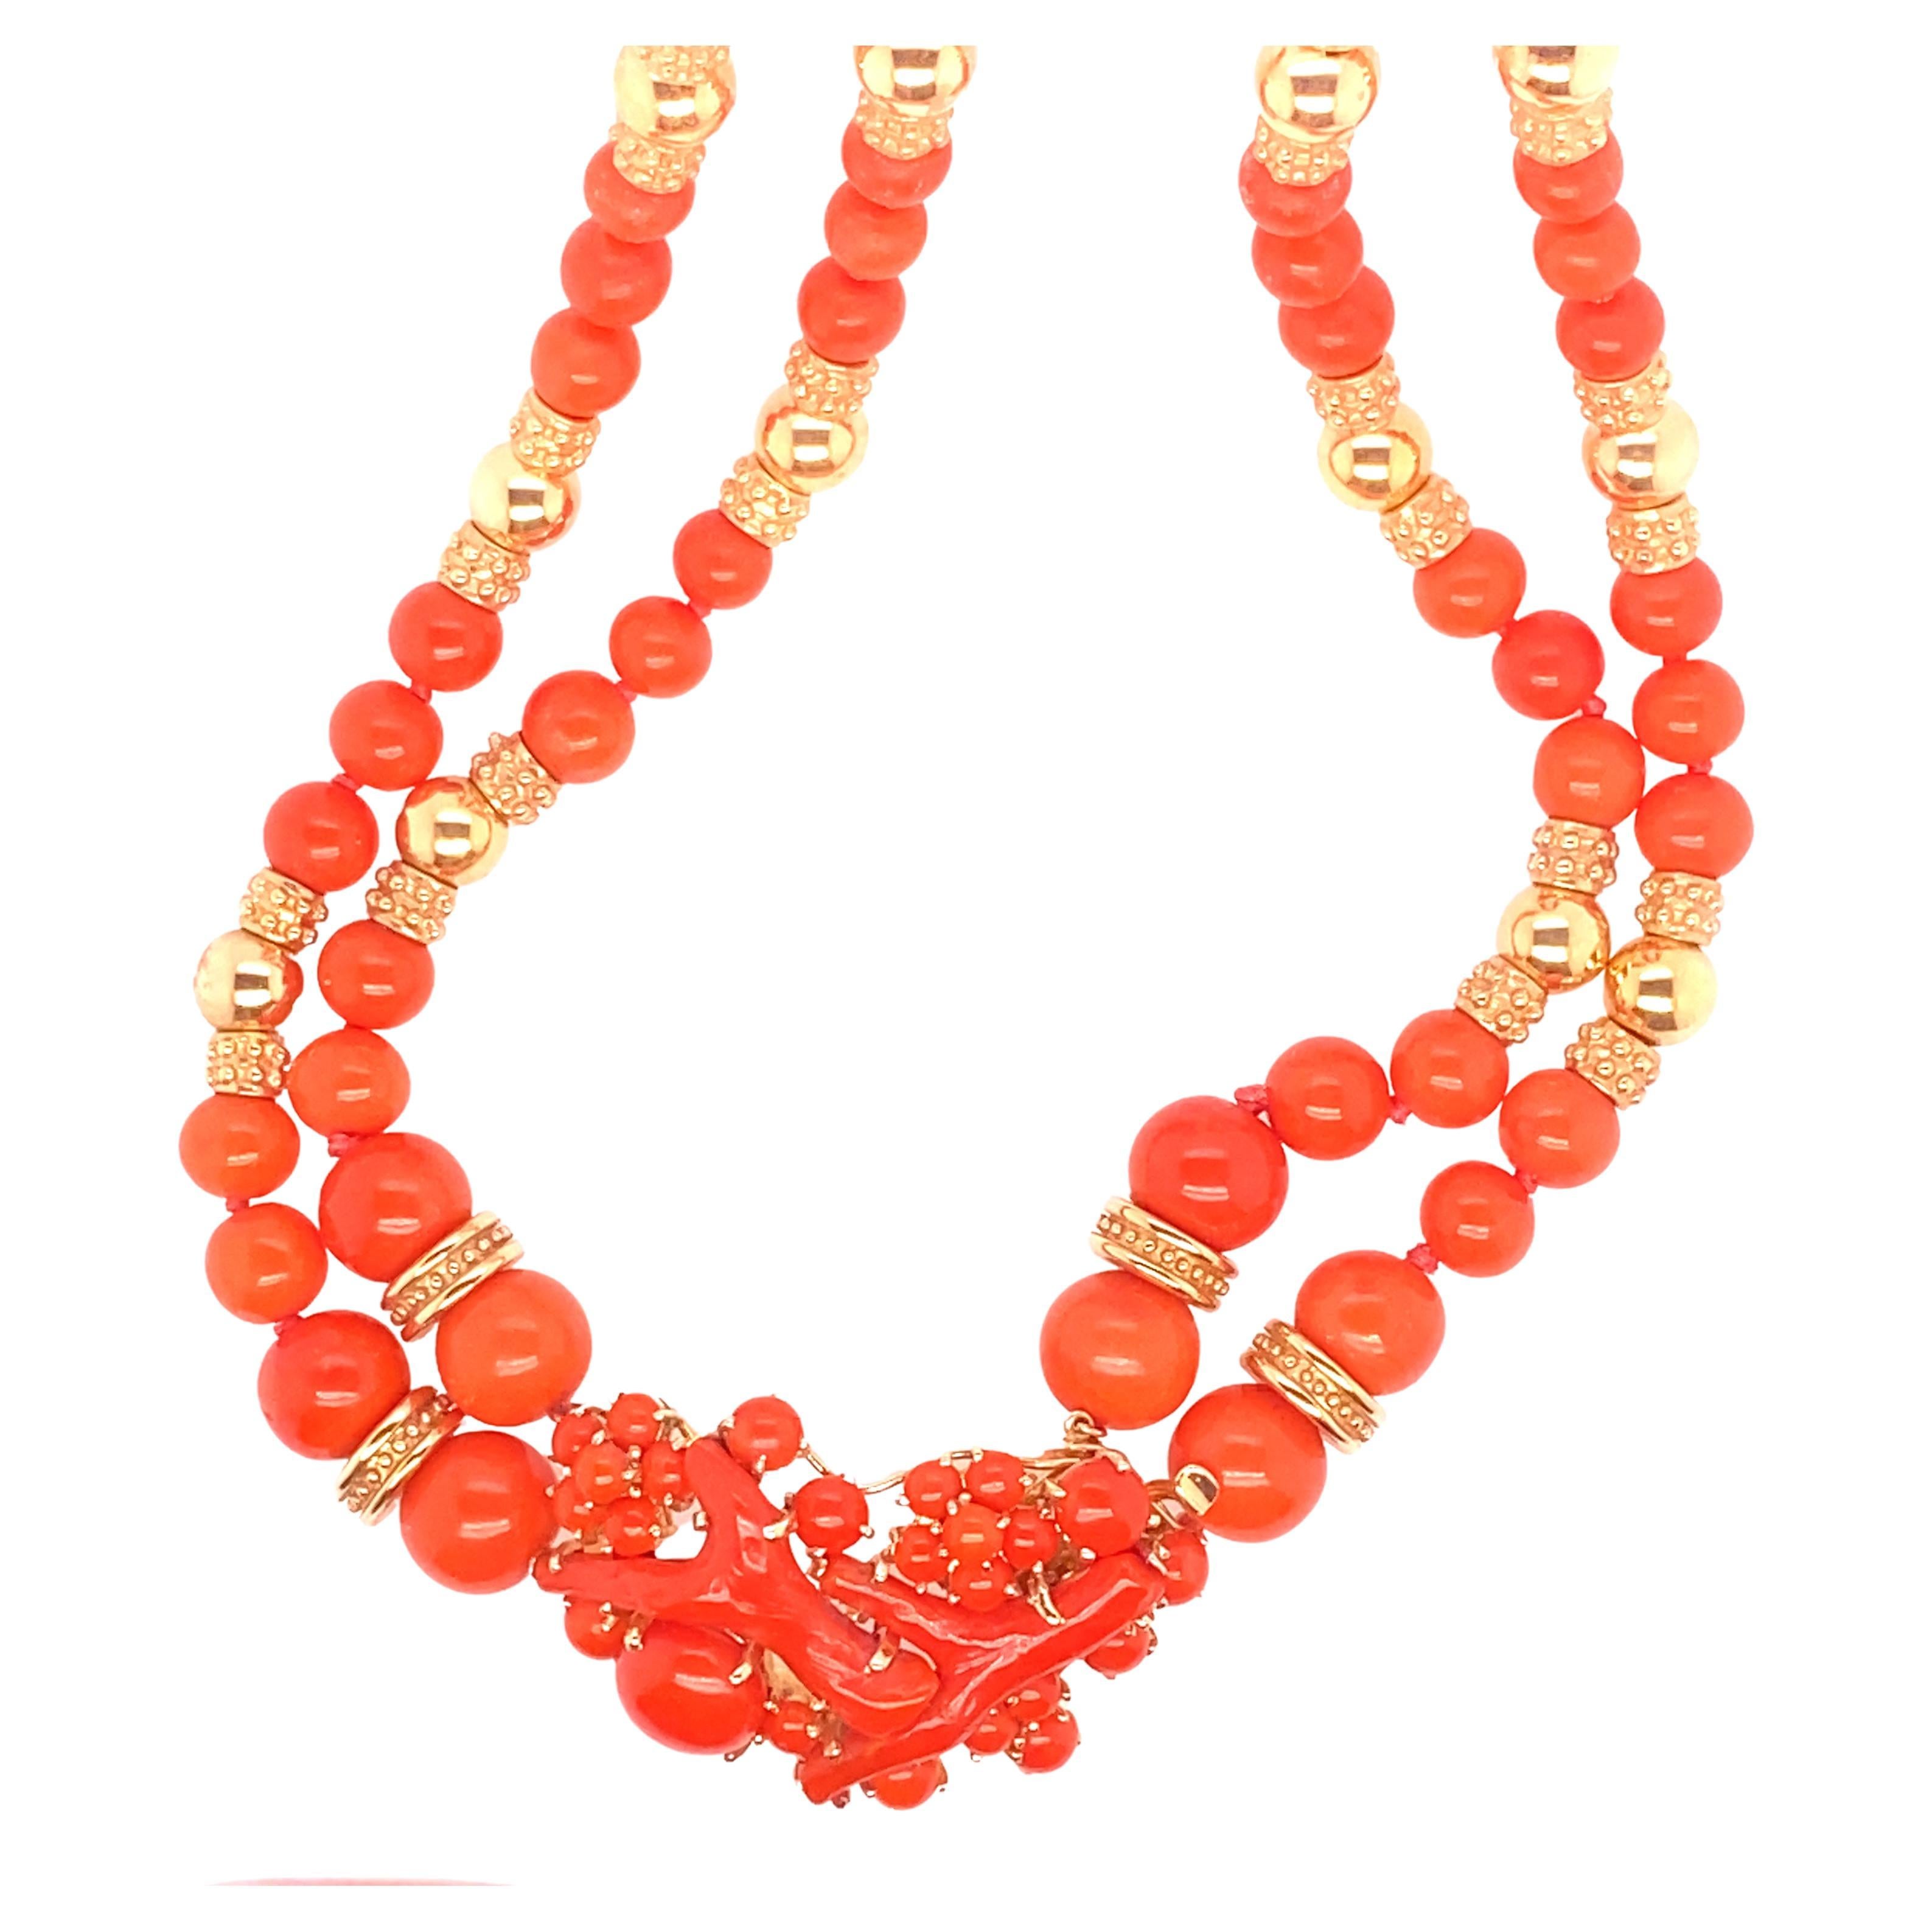 Vintage Italian Coral Bead Necklace with Gold Accents